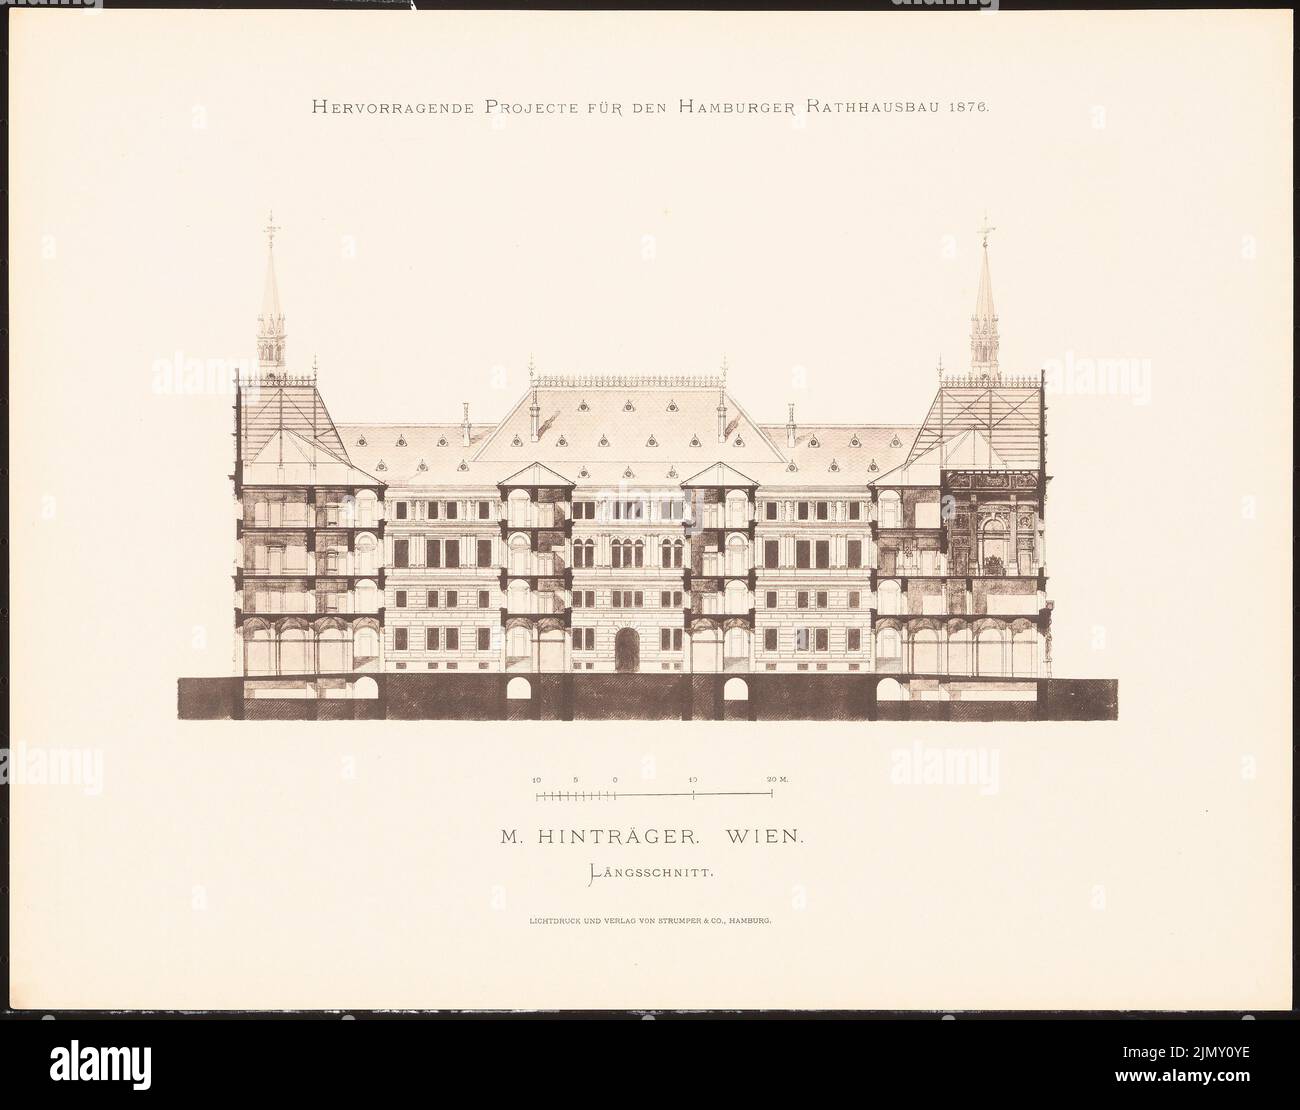 Haves M., excellent projects for the Hamburg town hall construction in 1876 (1876-1876): Longitudinal section. Light pressure on paper, 35.3 x 44.9 cm (including scan edges) Stock Photo